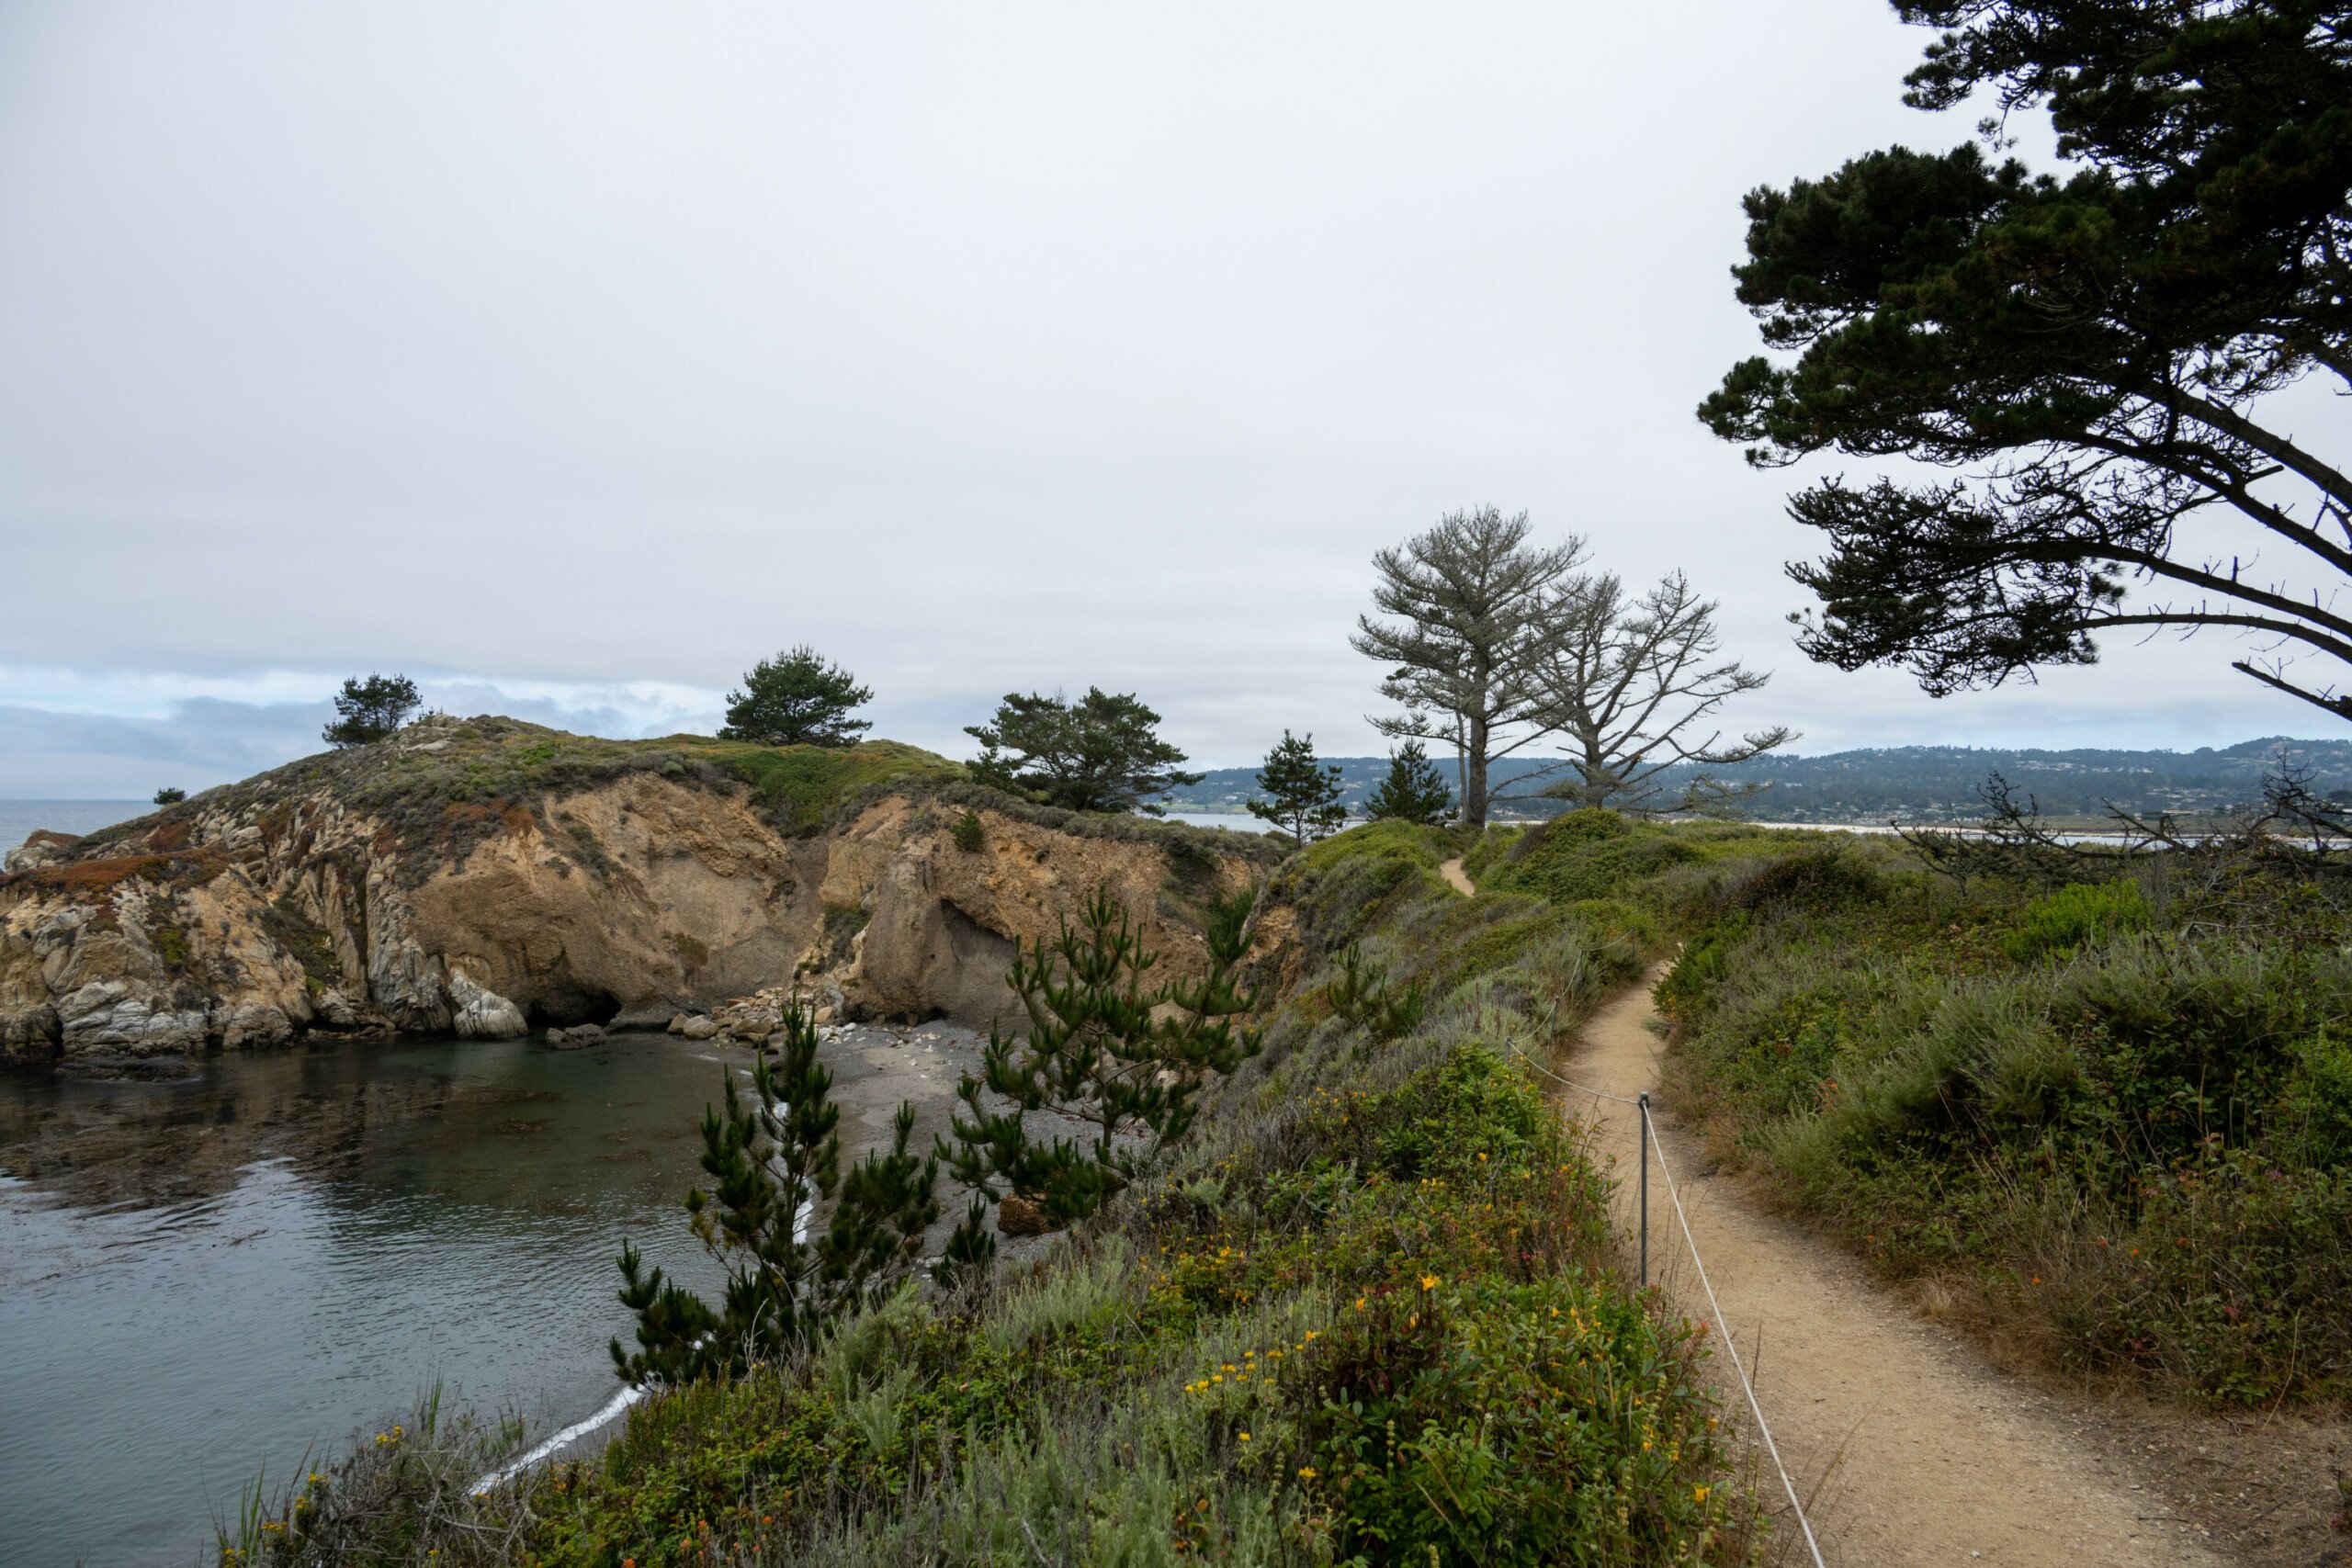 View of a trail leading through Point Lobos Natural Reserve with verdant foliage and rugged coastline in the background.